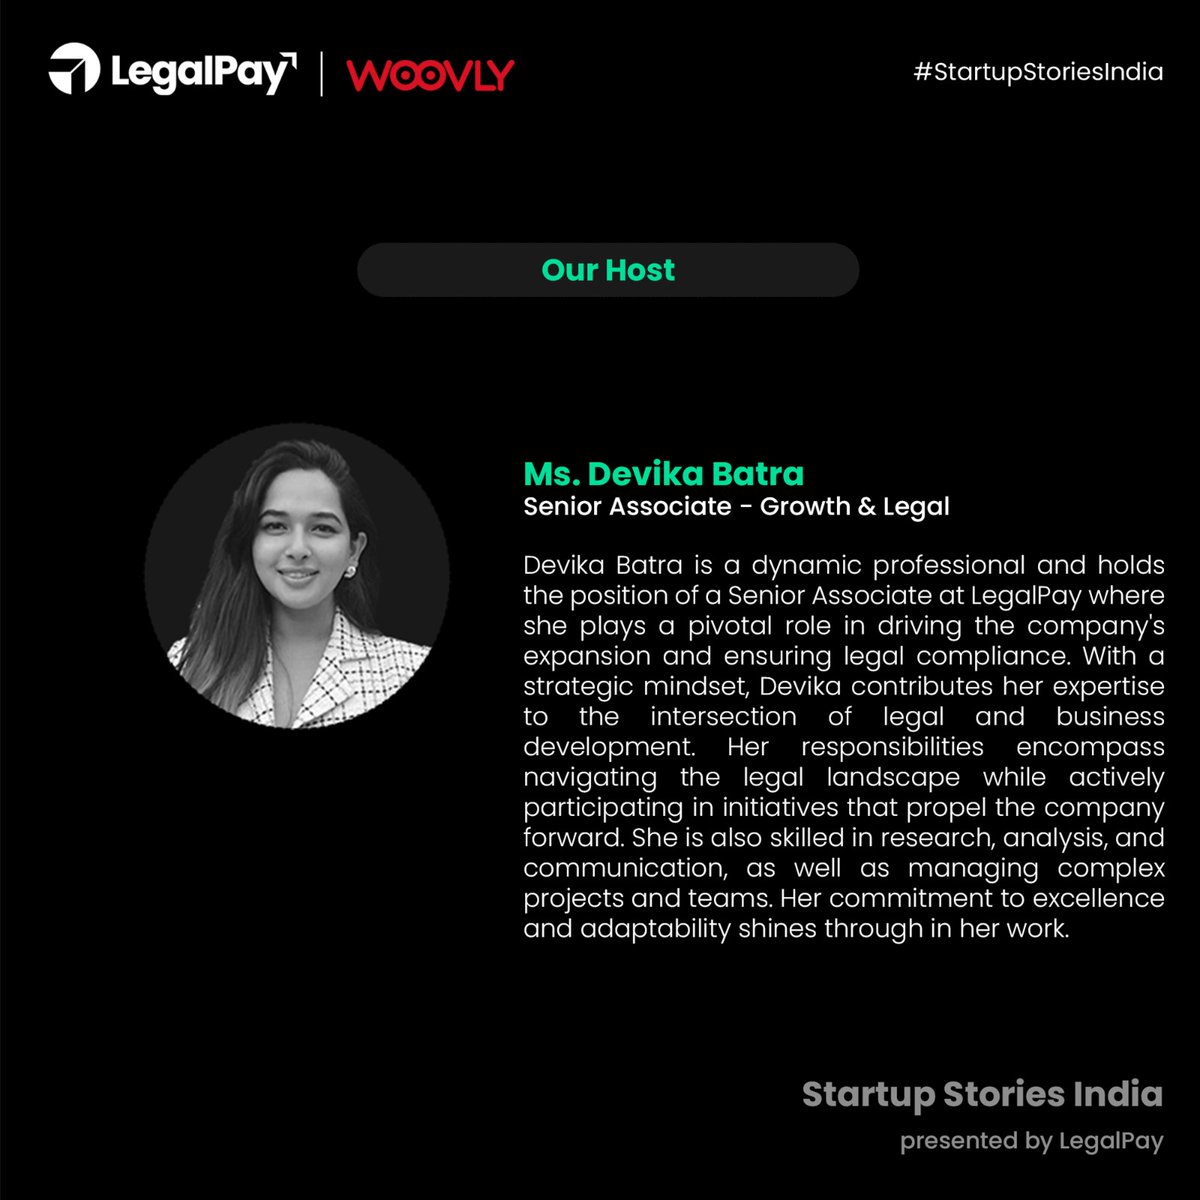 🎉 Get ready for an episode dropping soon on Startup Stories India! Join us as Neha Suyal, the founder of Woovly, a journey into the world of social commerce. 
Stay tuned for the full podcast.
#marketinginfluencer #influencersmarketing #socialcommerce #startupstoriesindia